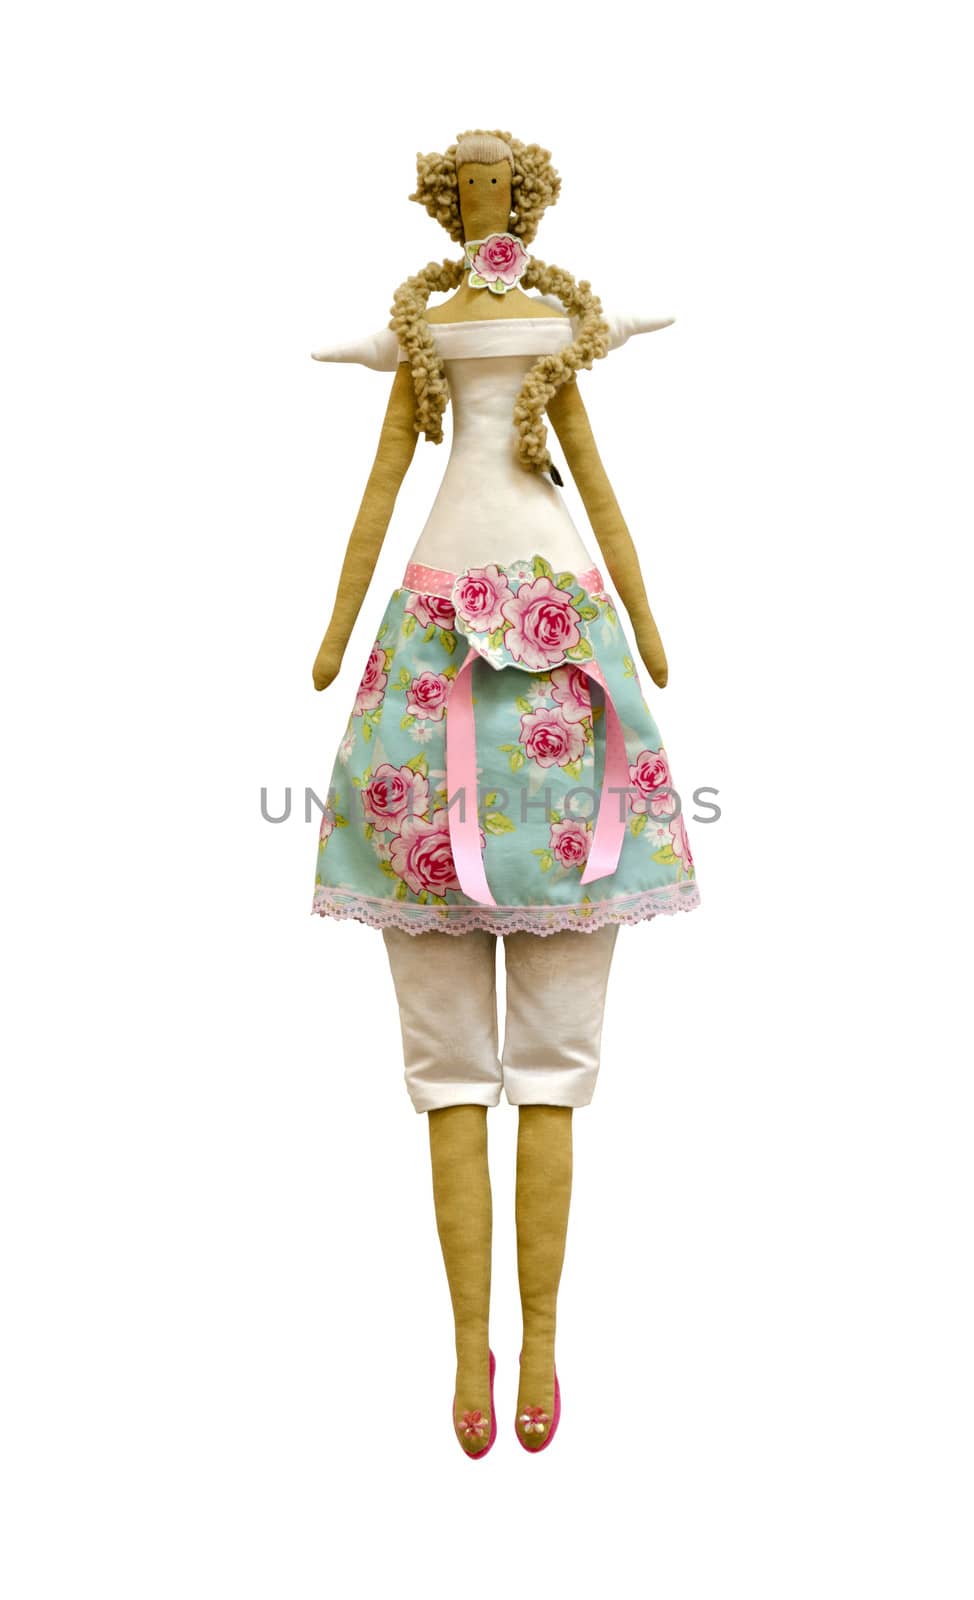 Handmade isolated doll in dress and pants with wings and roses by pt-home